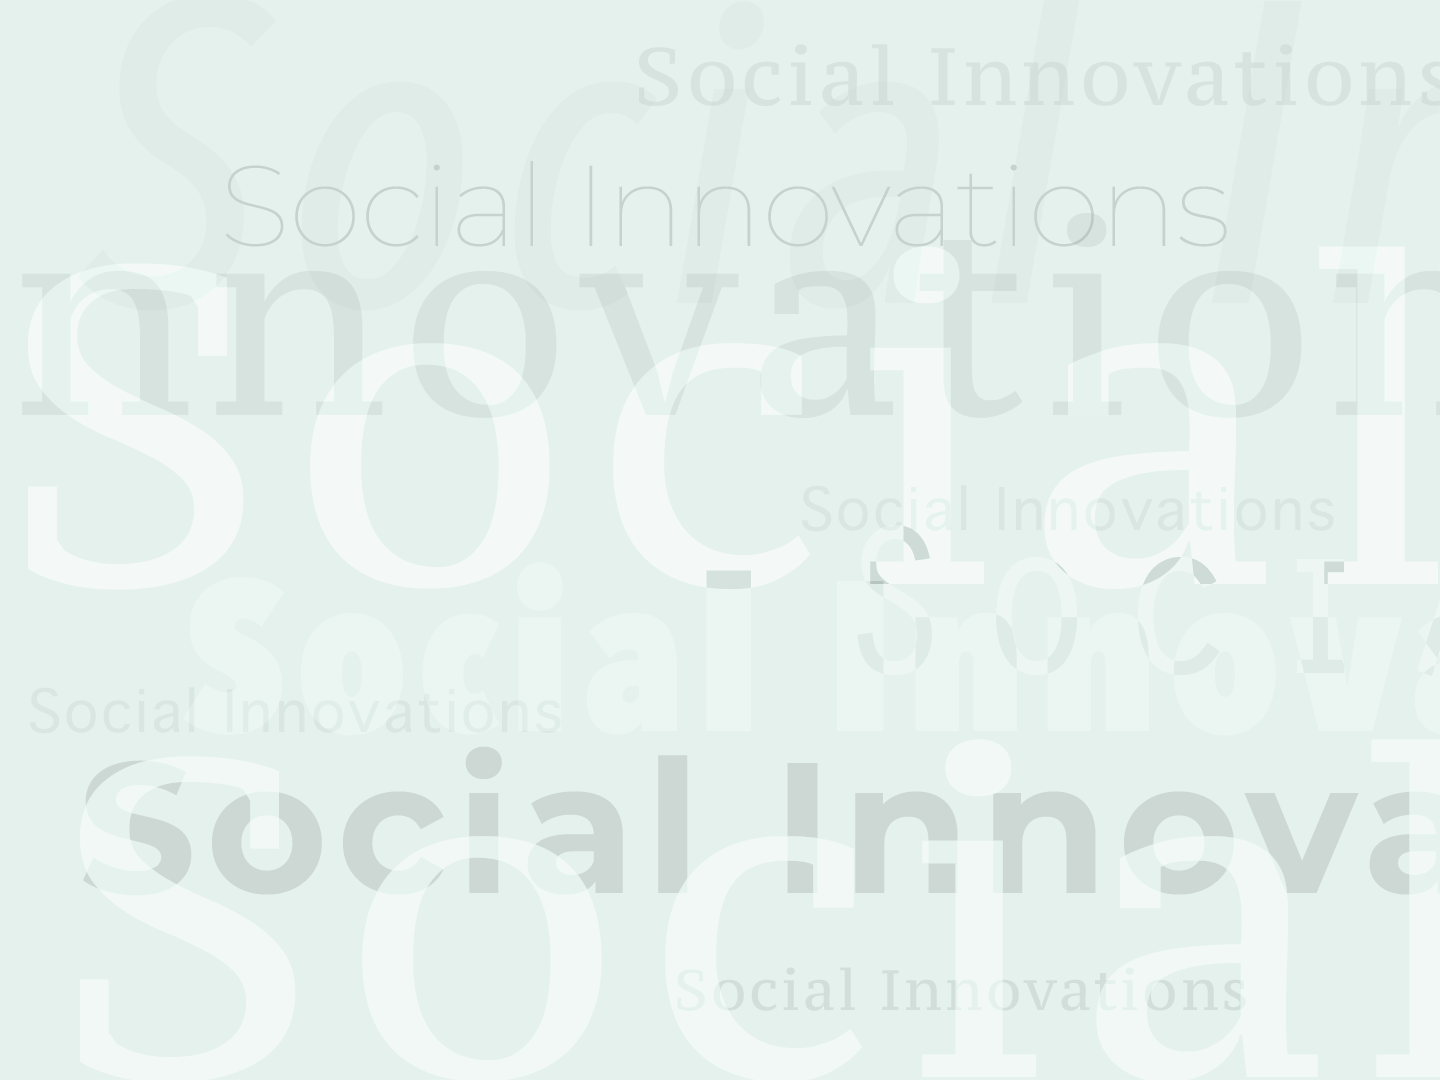 Leads to: Social innovations